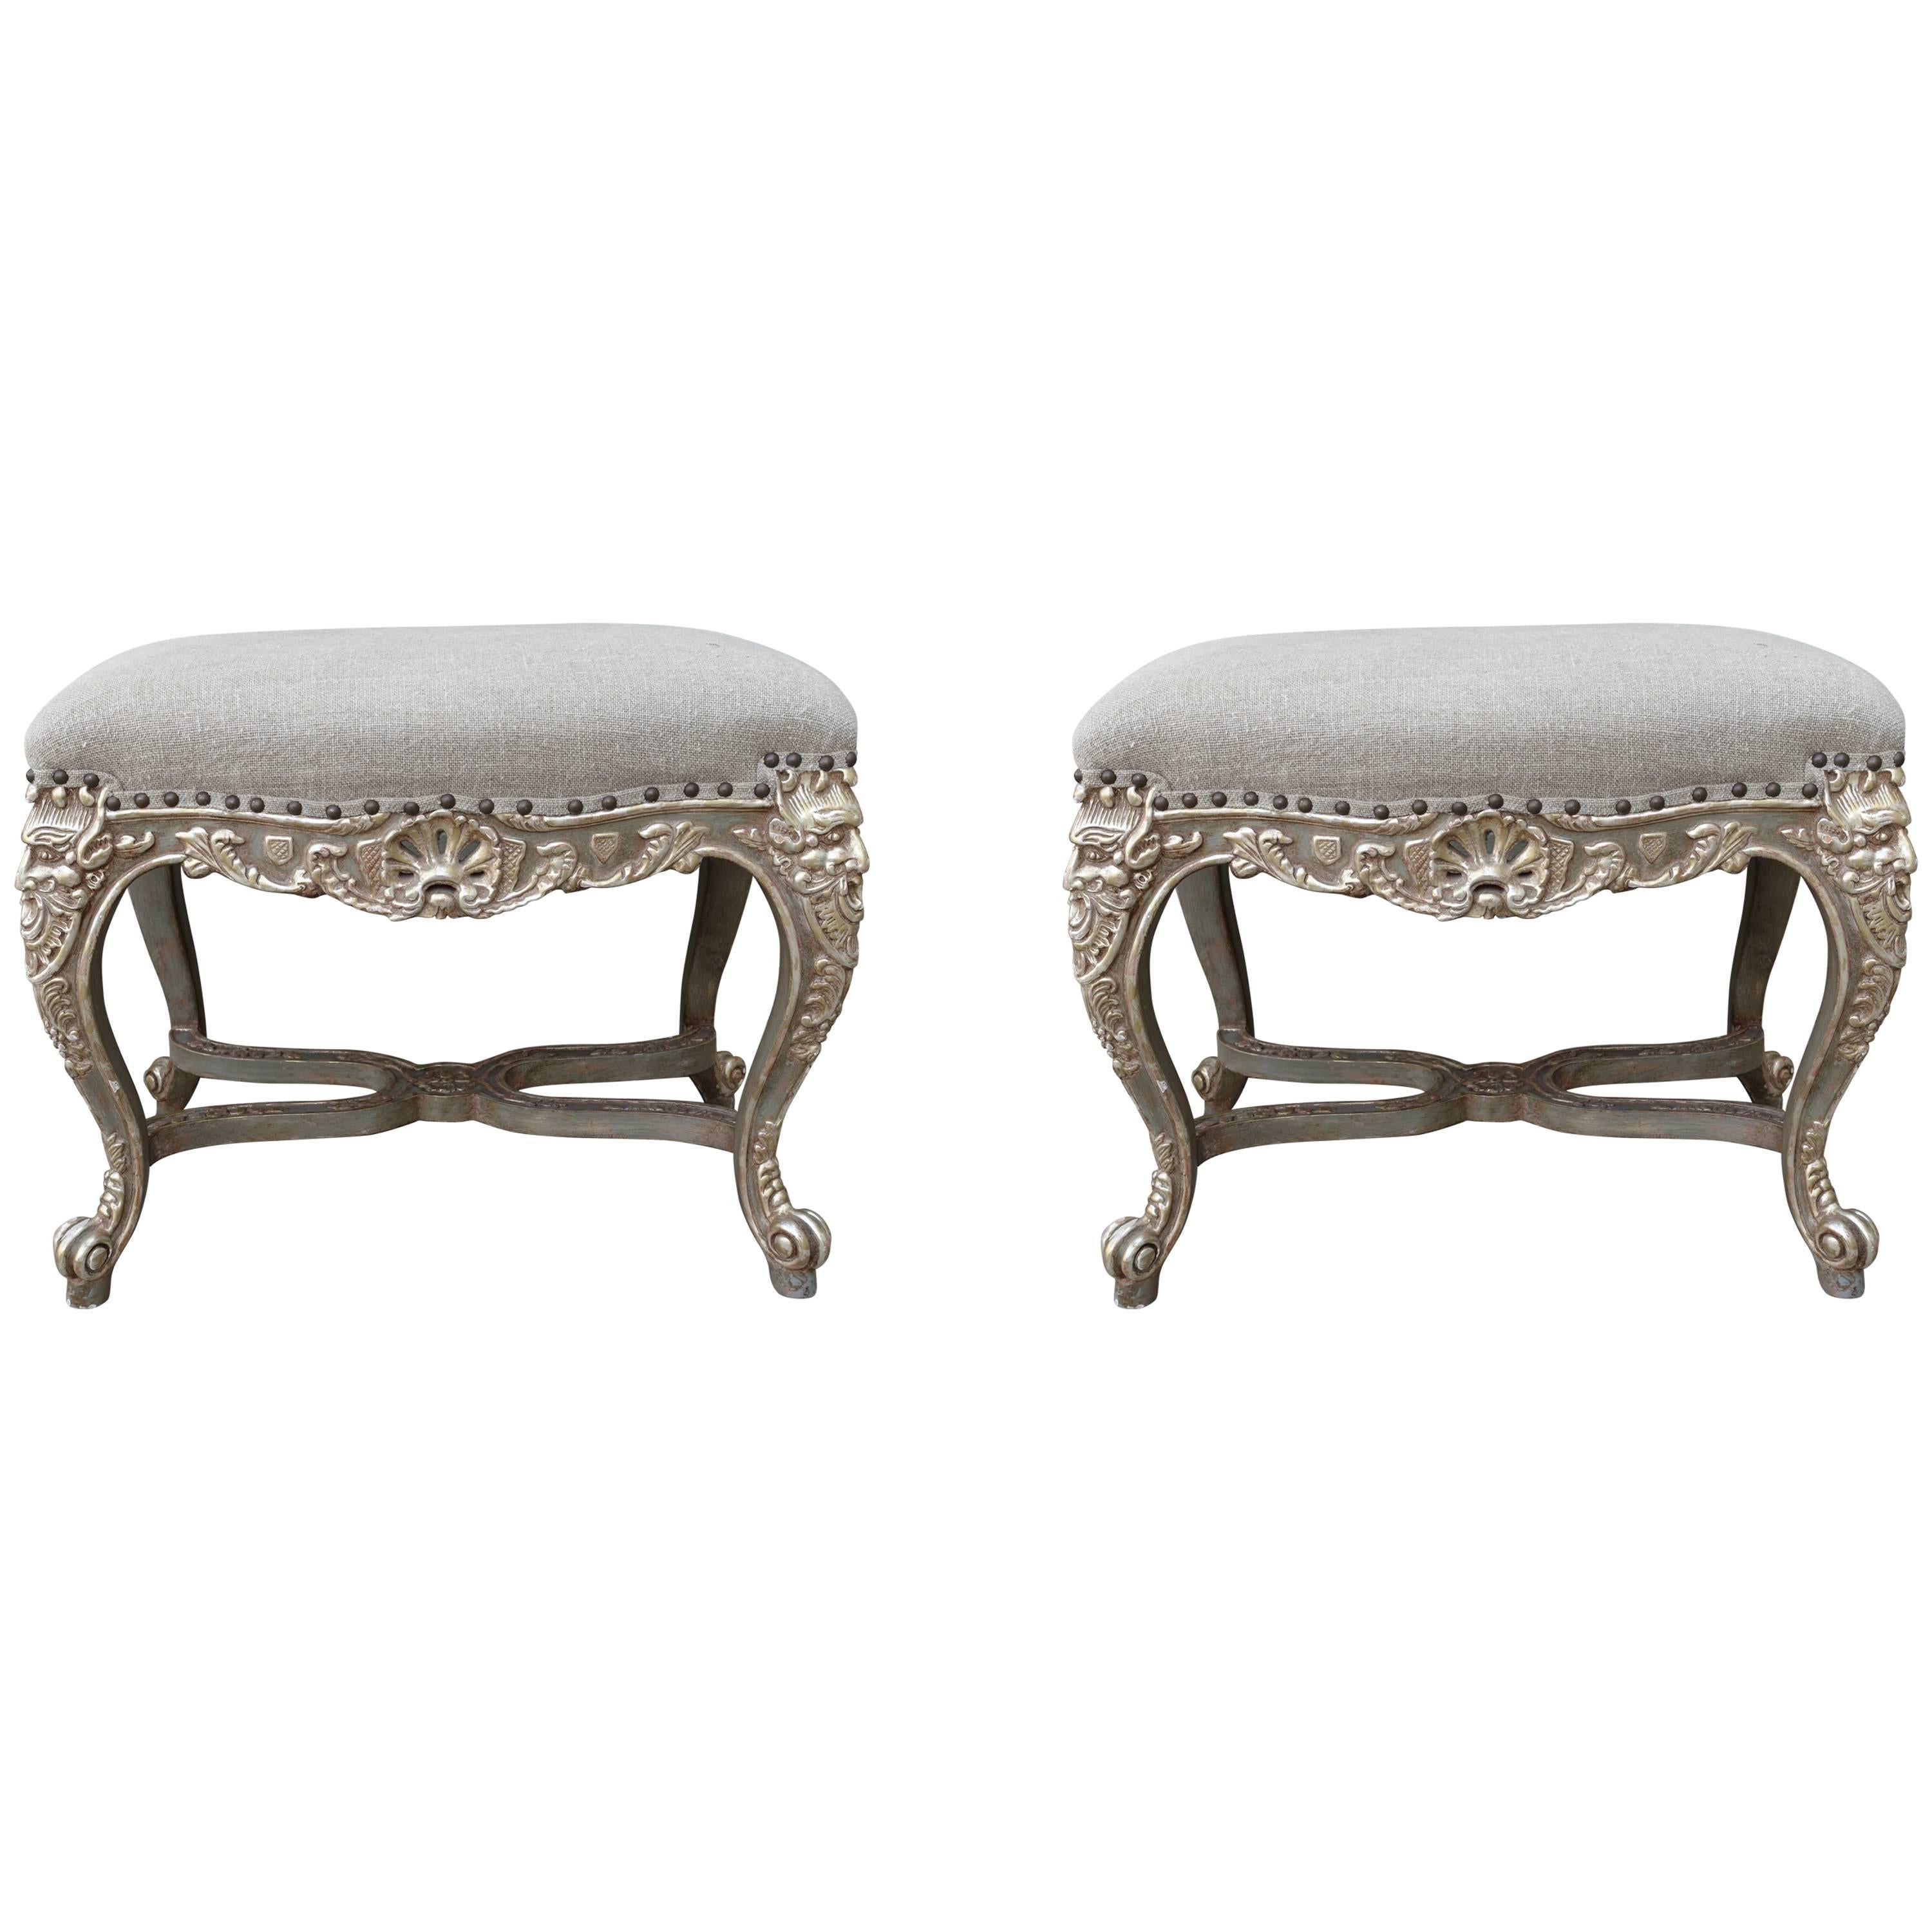 Pair of French Rococo Style Benches